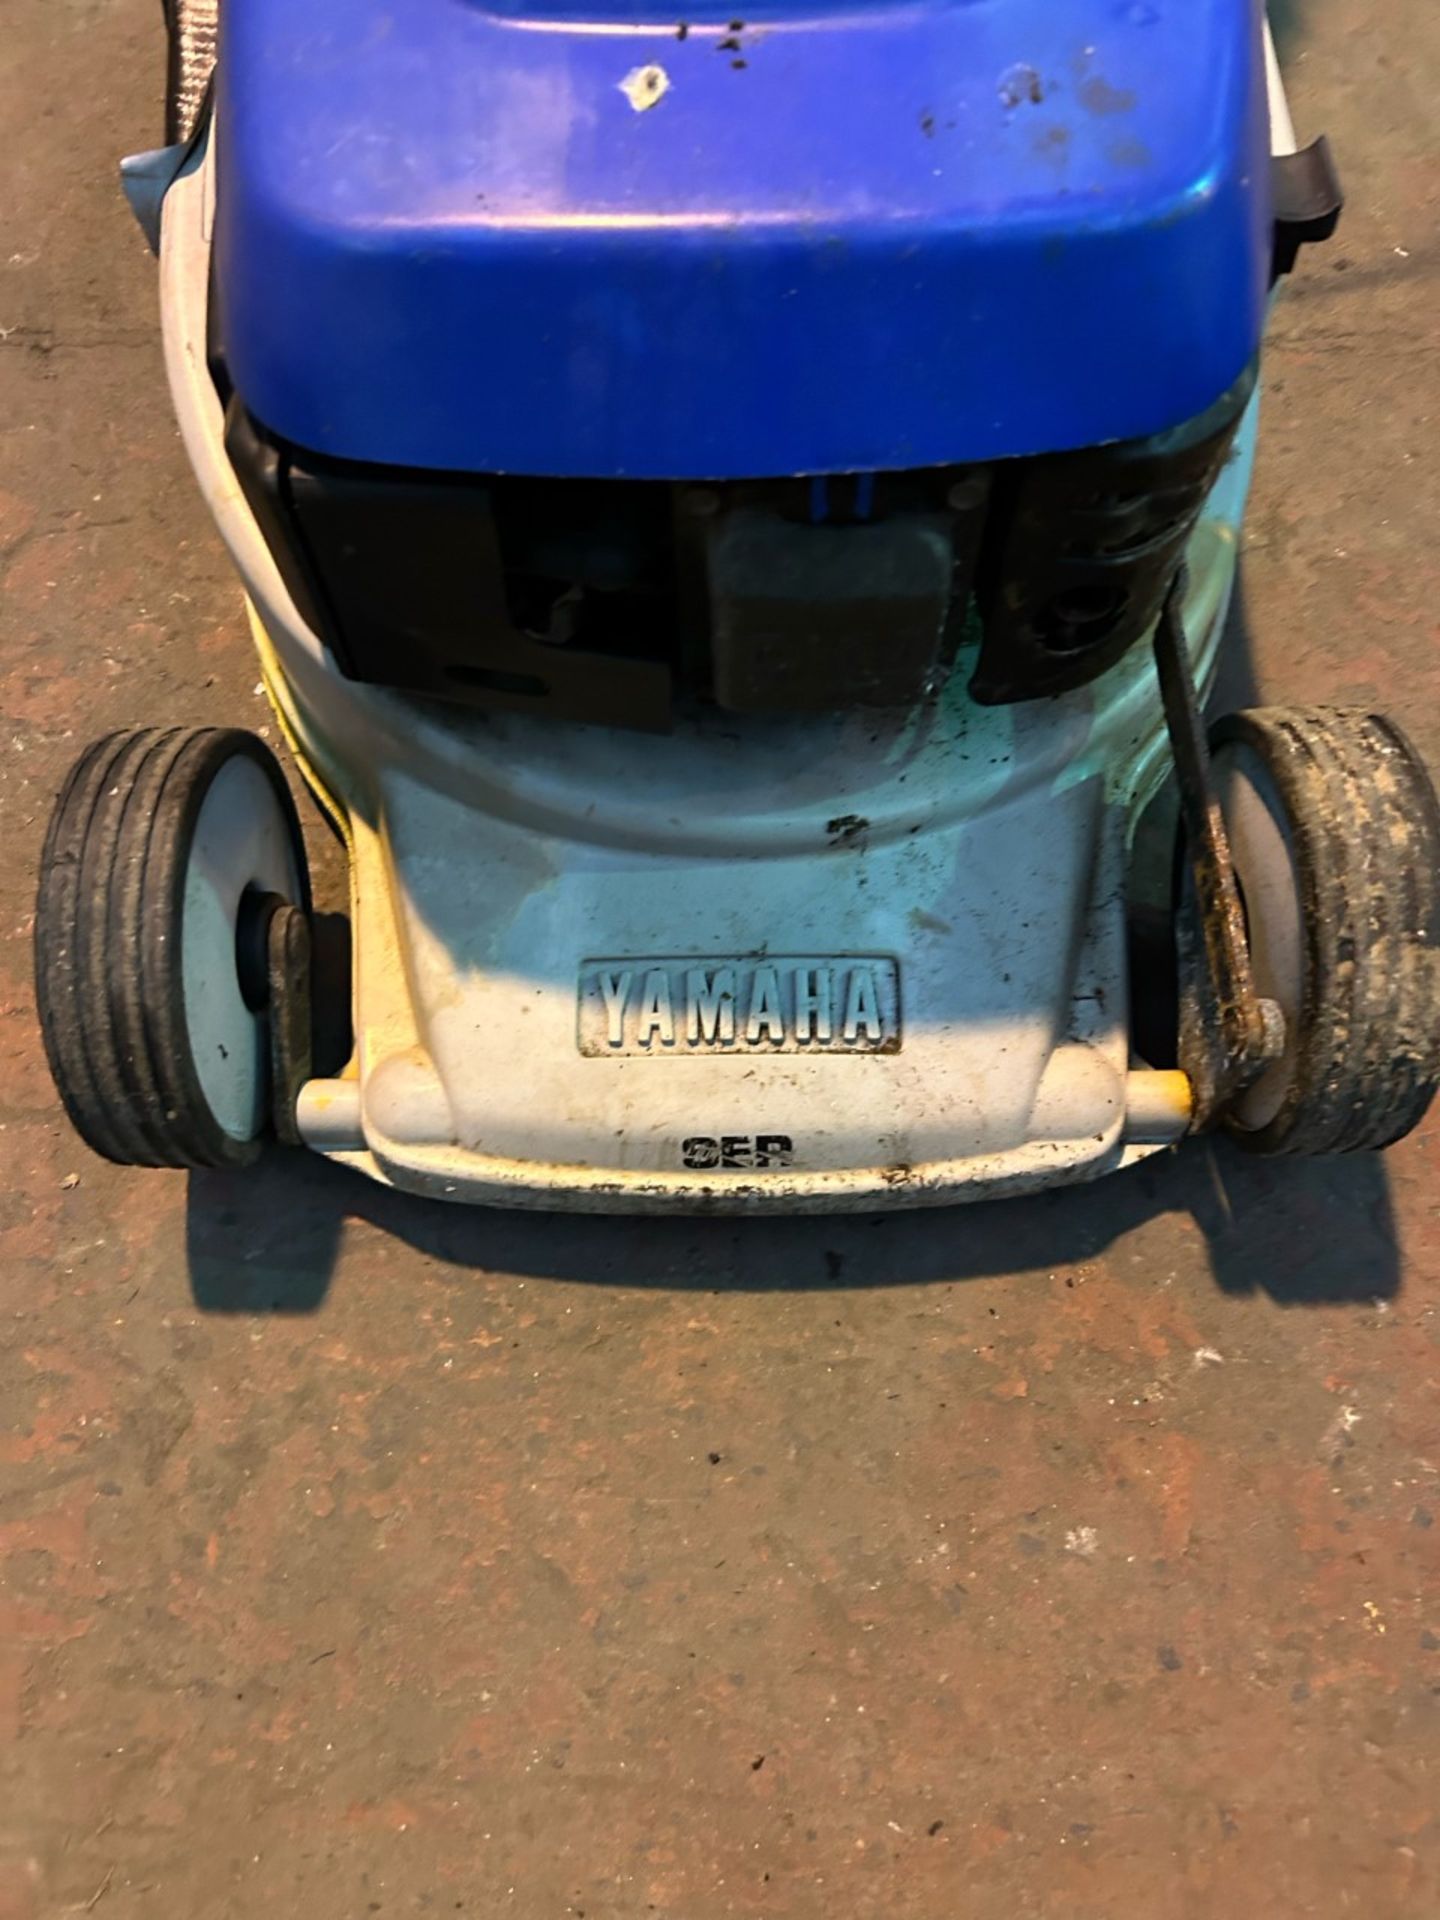 Yamaha YLM 342 self propelled lawn mower with roller average condition. Needs service - Image 2 of 4